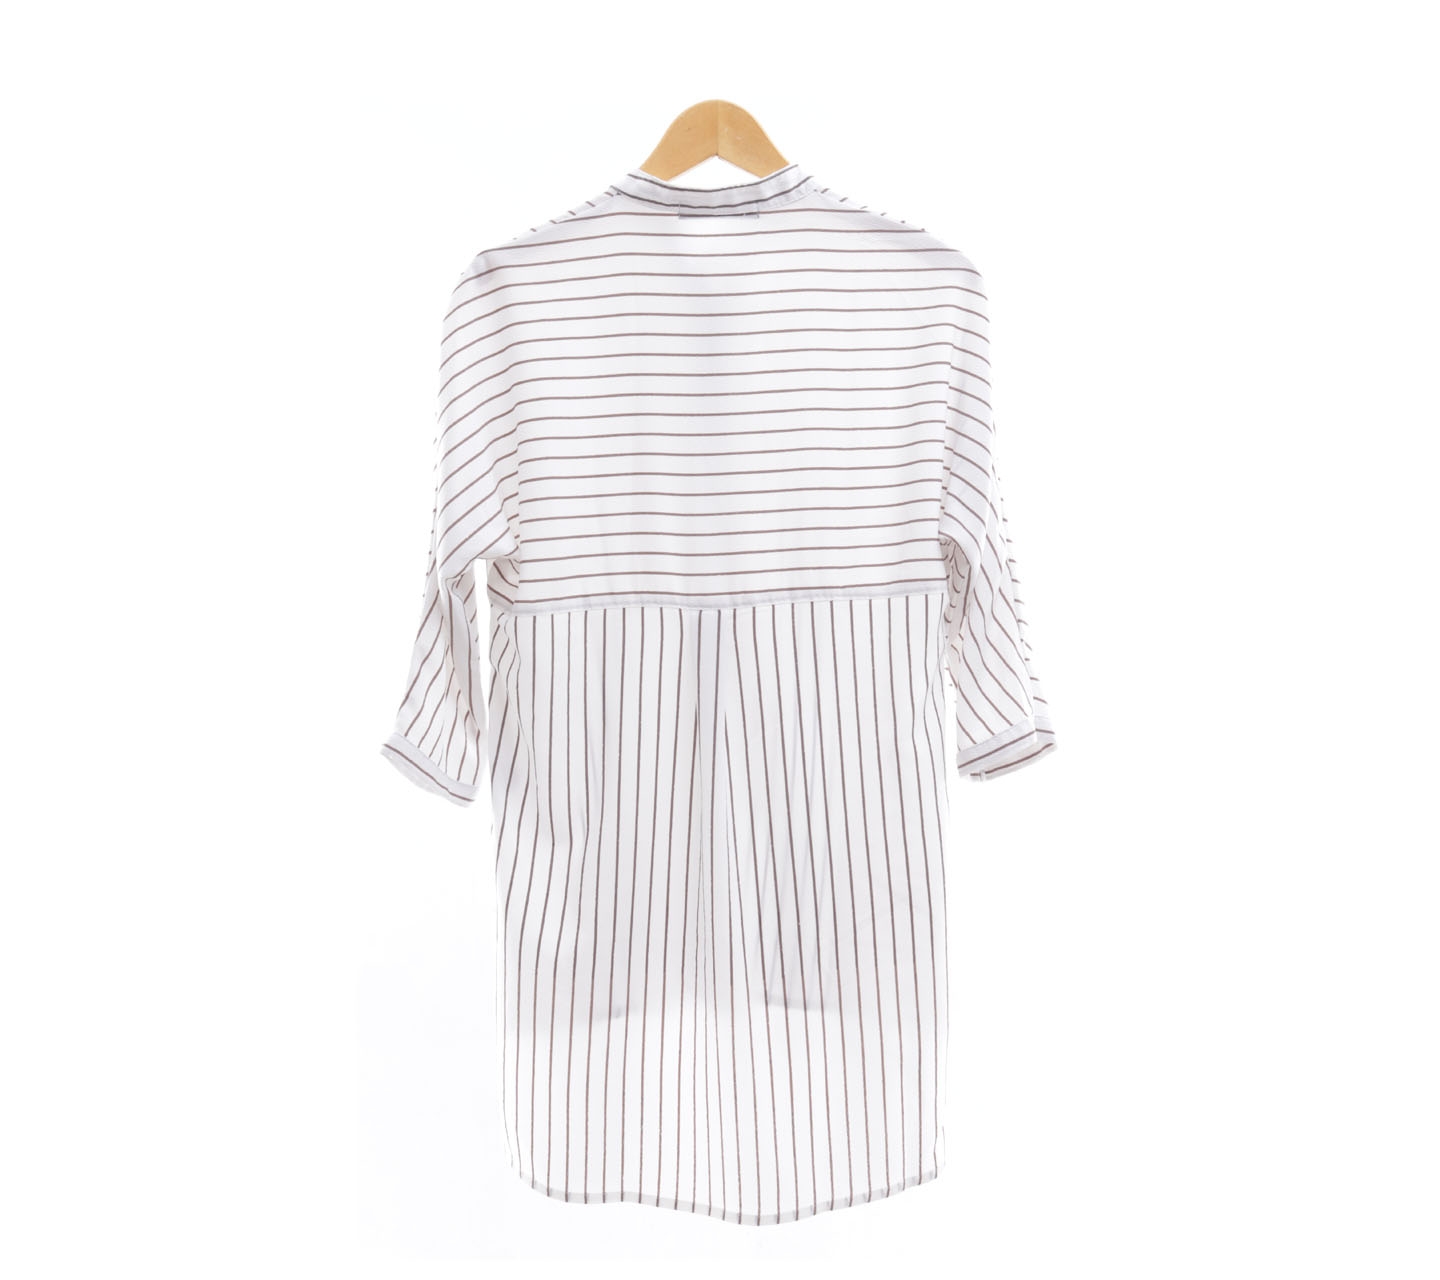 Simplicity White Striped Blouse